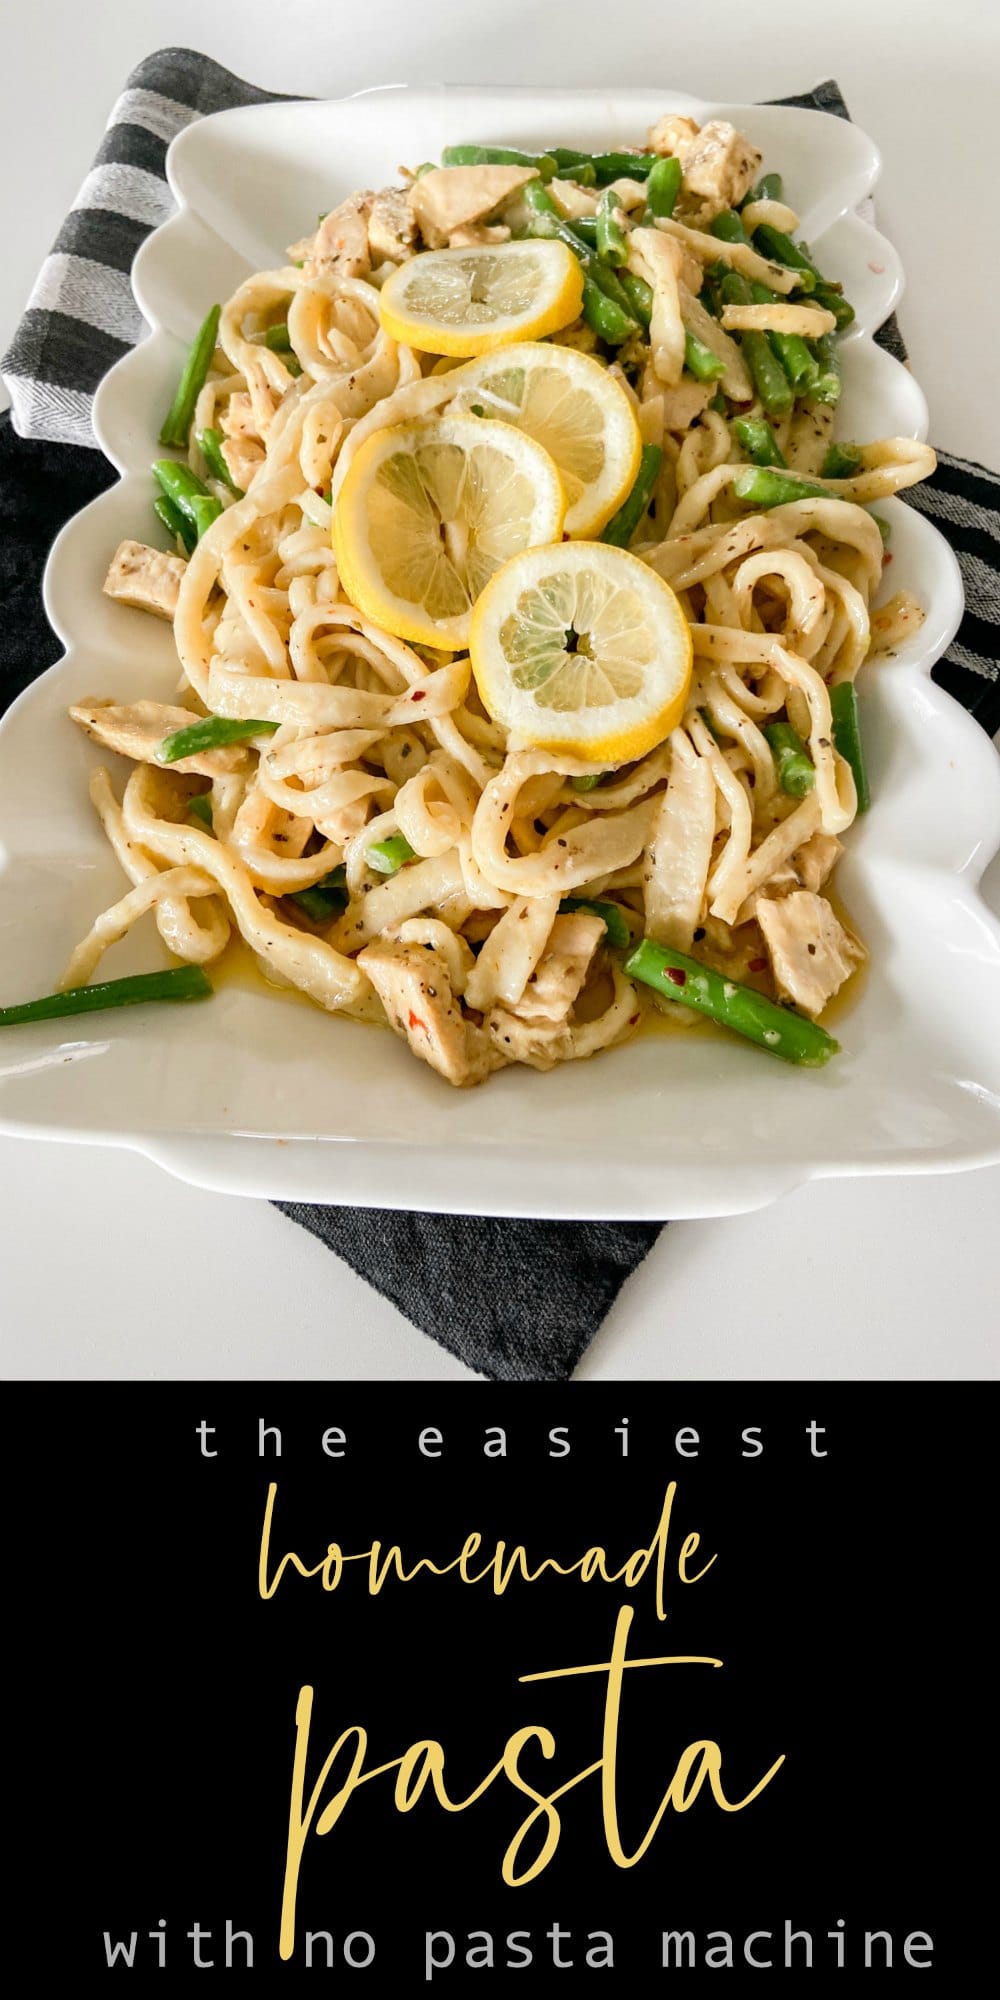 How to make the easiest homemade pasta without a pasta machine. Pasta with chicken and asparagus.